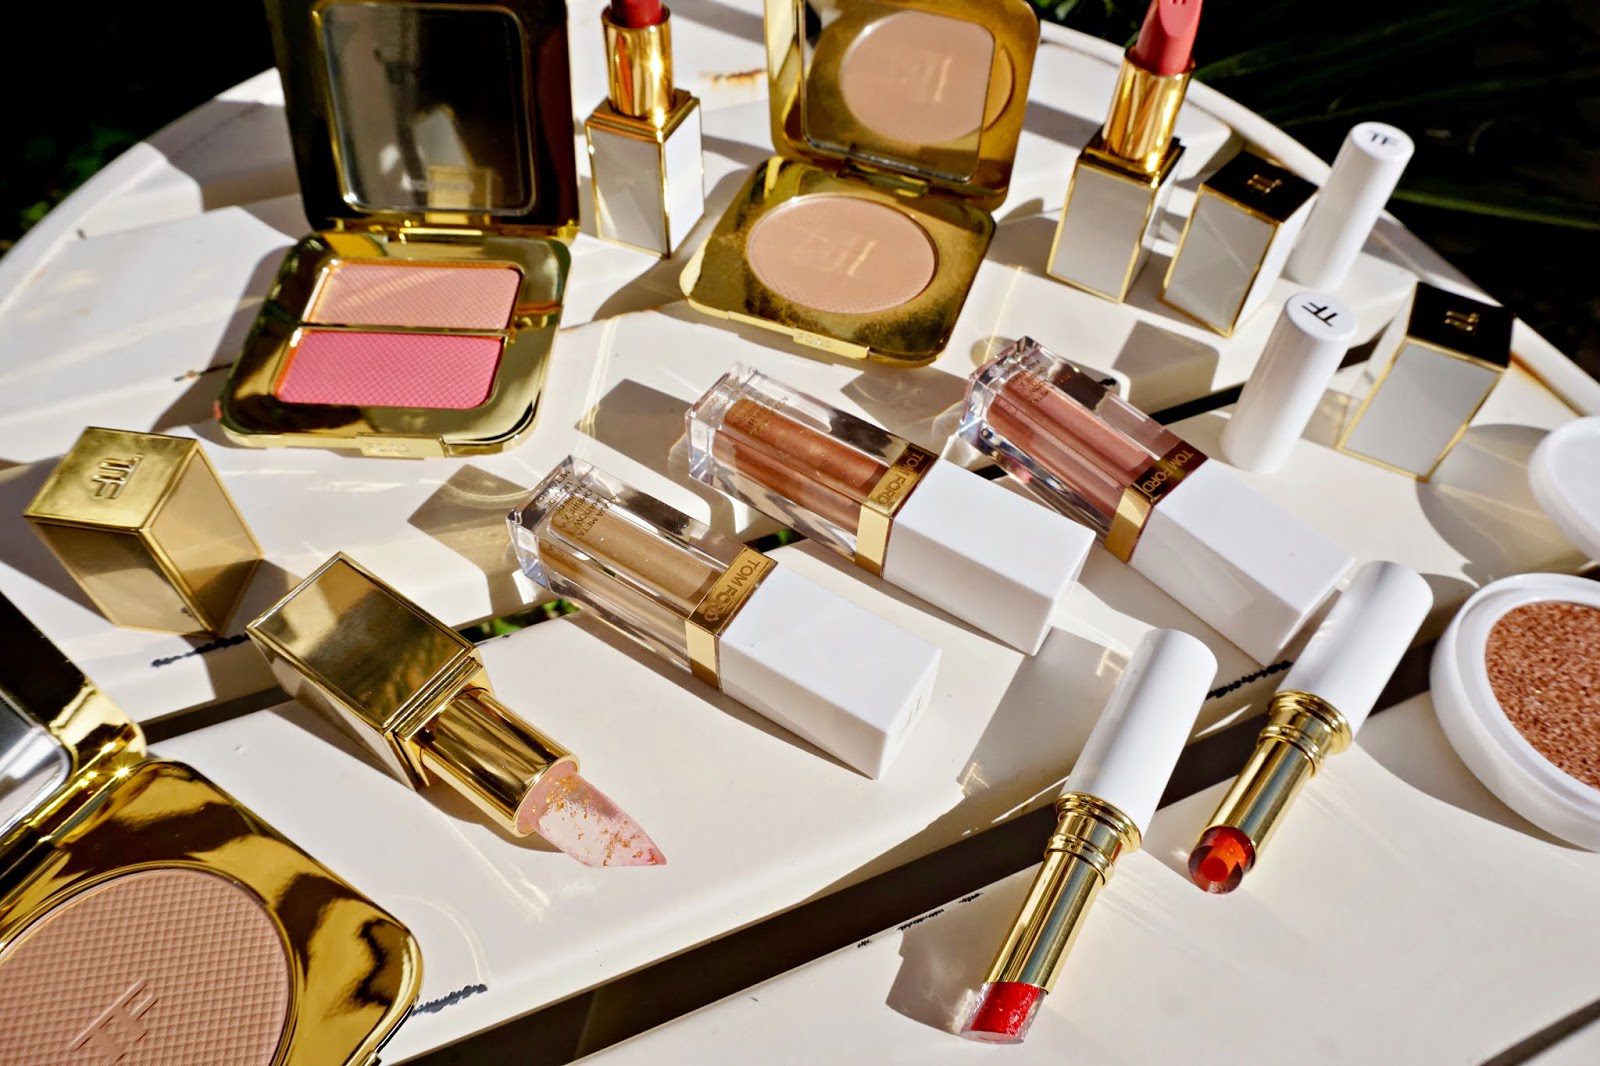 Tom Ford Archives - Beauty Professor